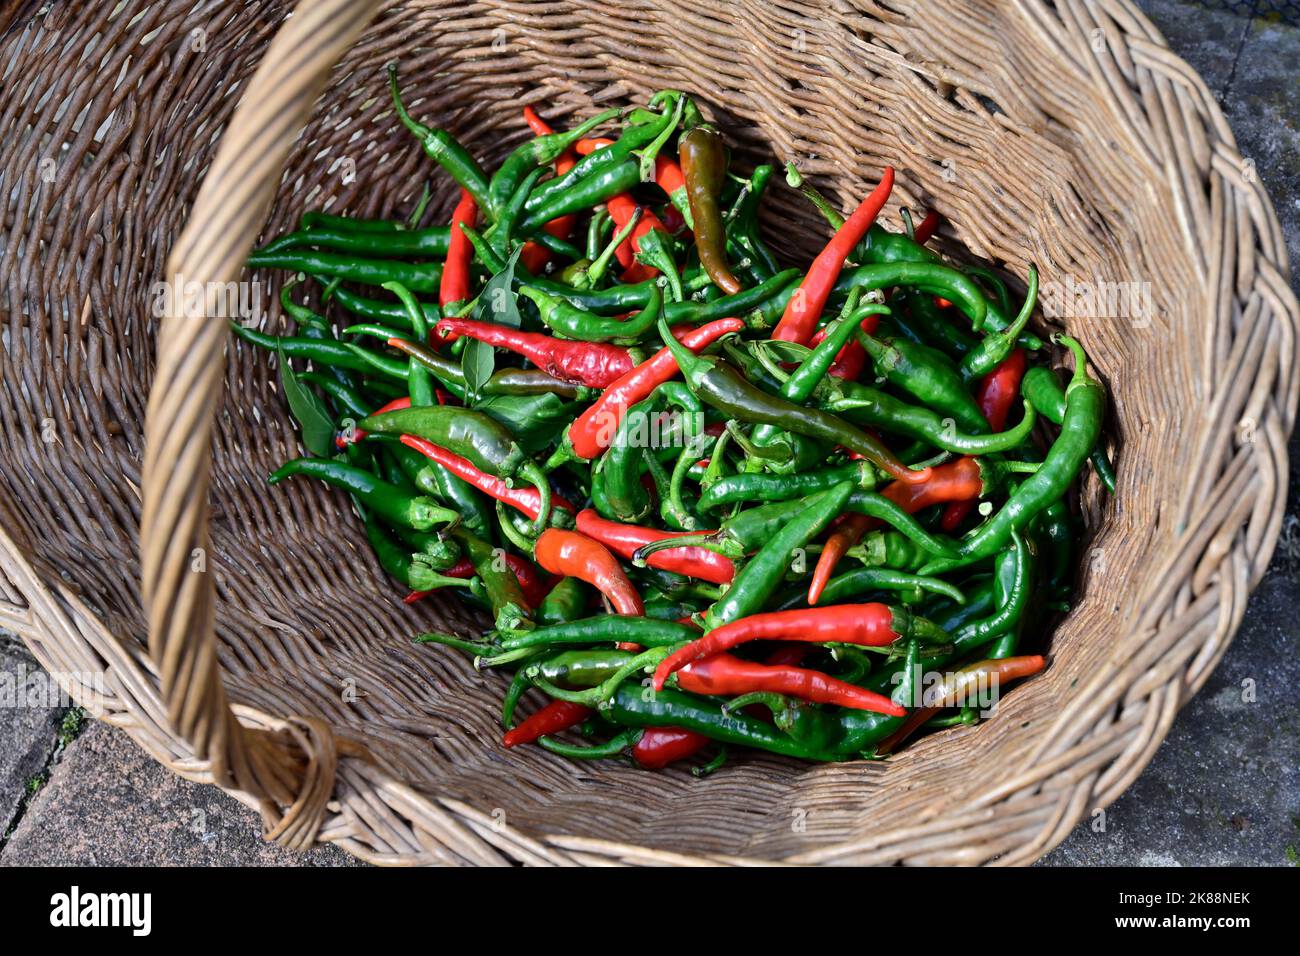 Fresh red and green chilli peppers grown in garden harvested and in wicker basket Stock Photo